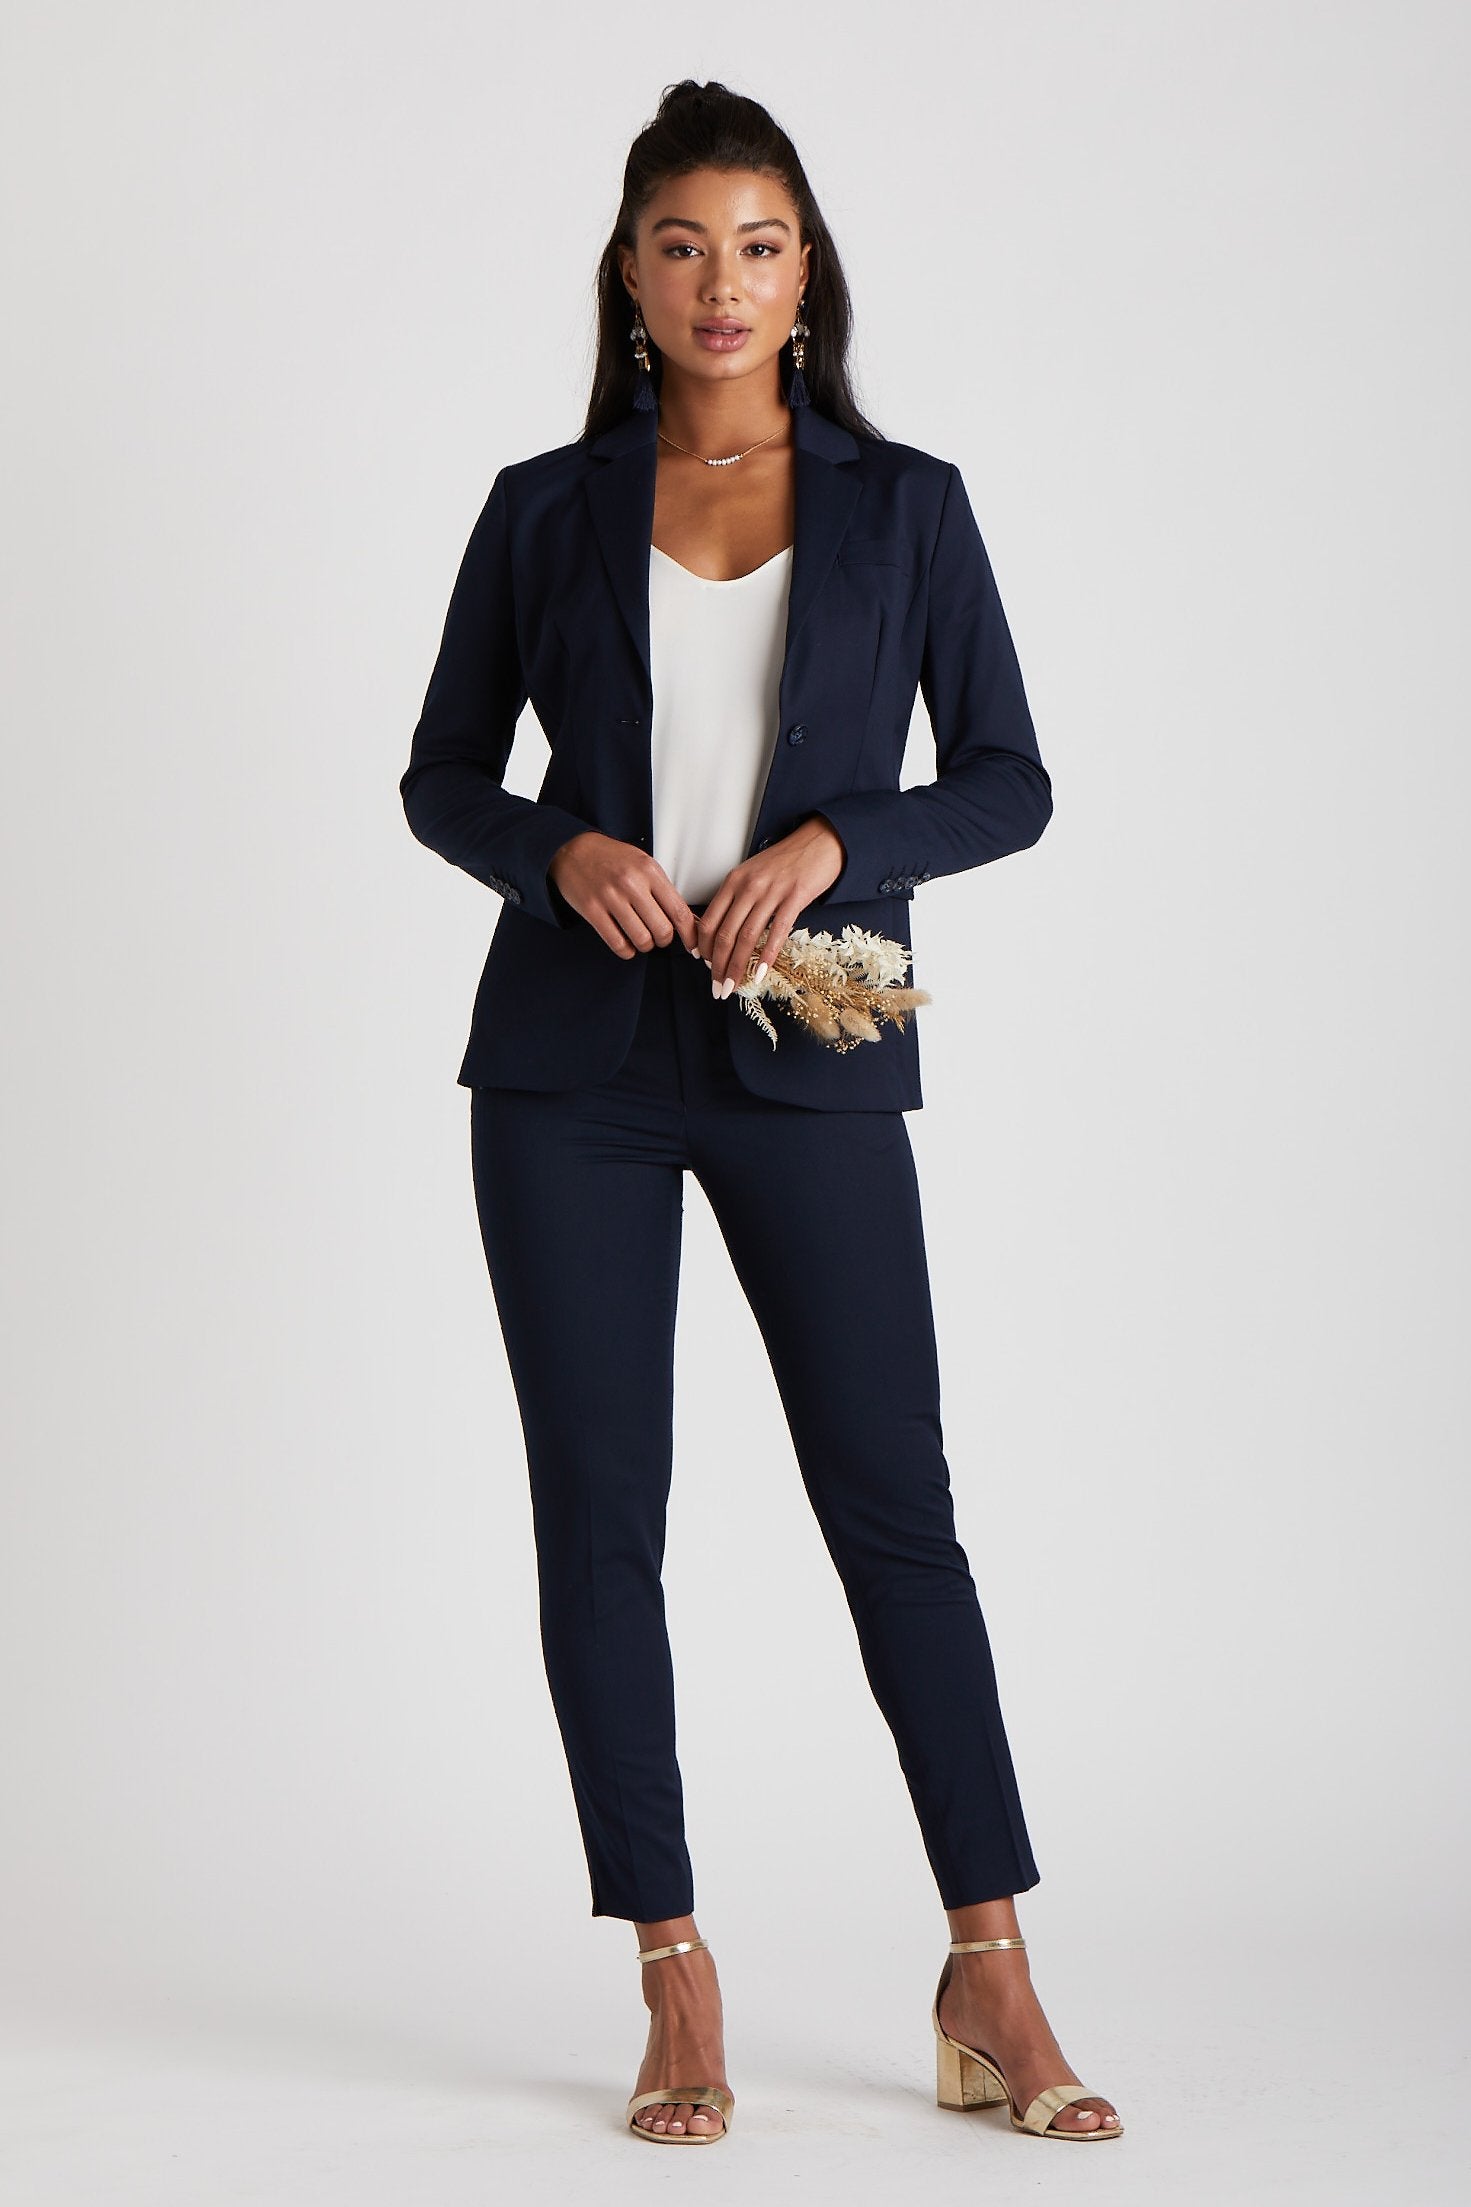 Best oversized suits for women – How to style the suit